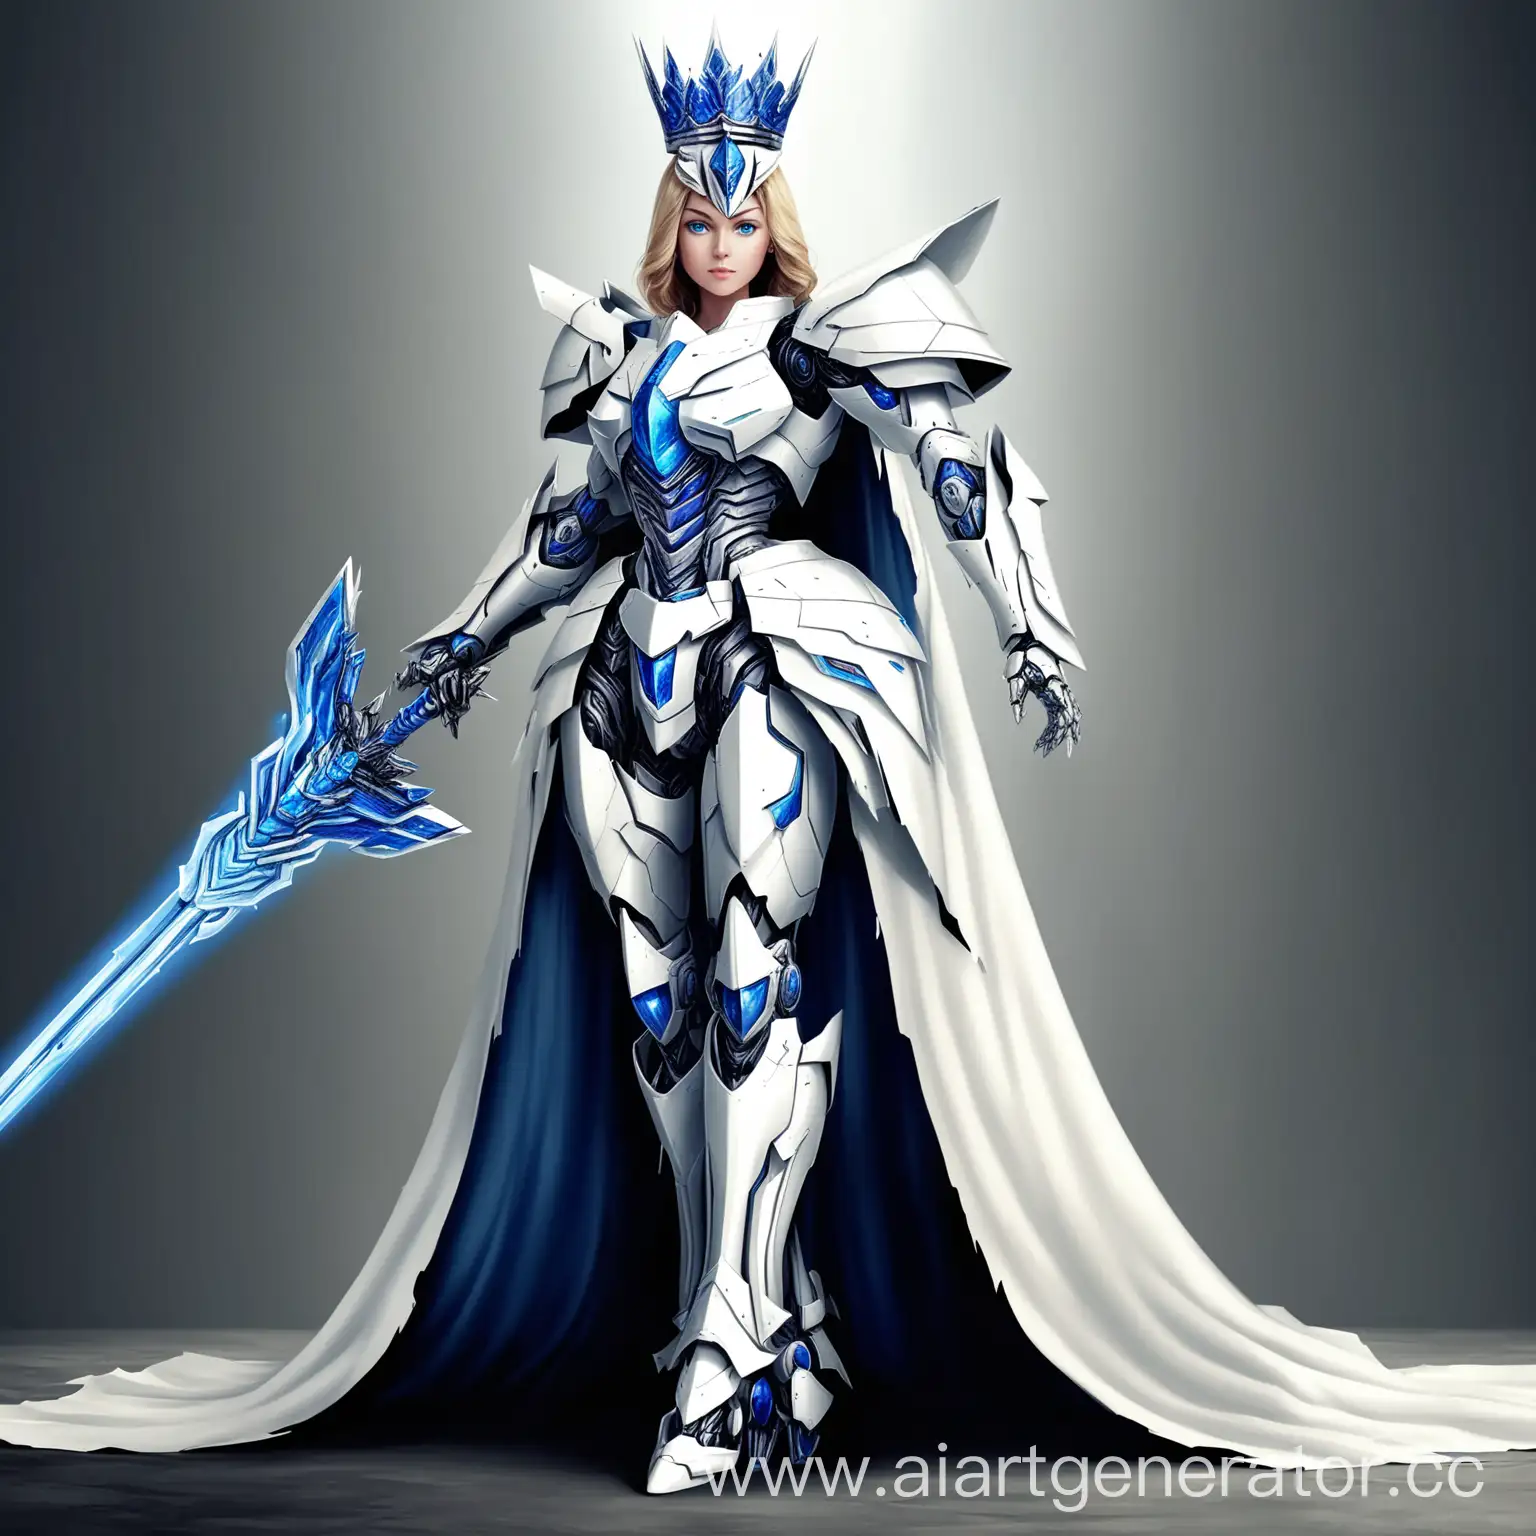 Female-Transformer-in-White-Armor-with-Sword-and-Cloak